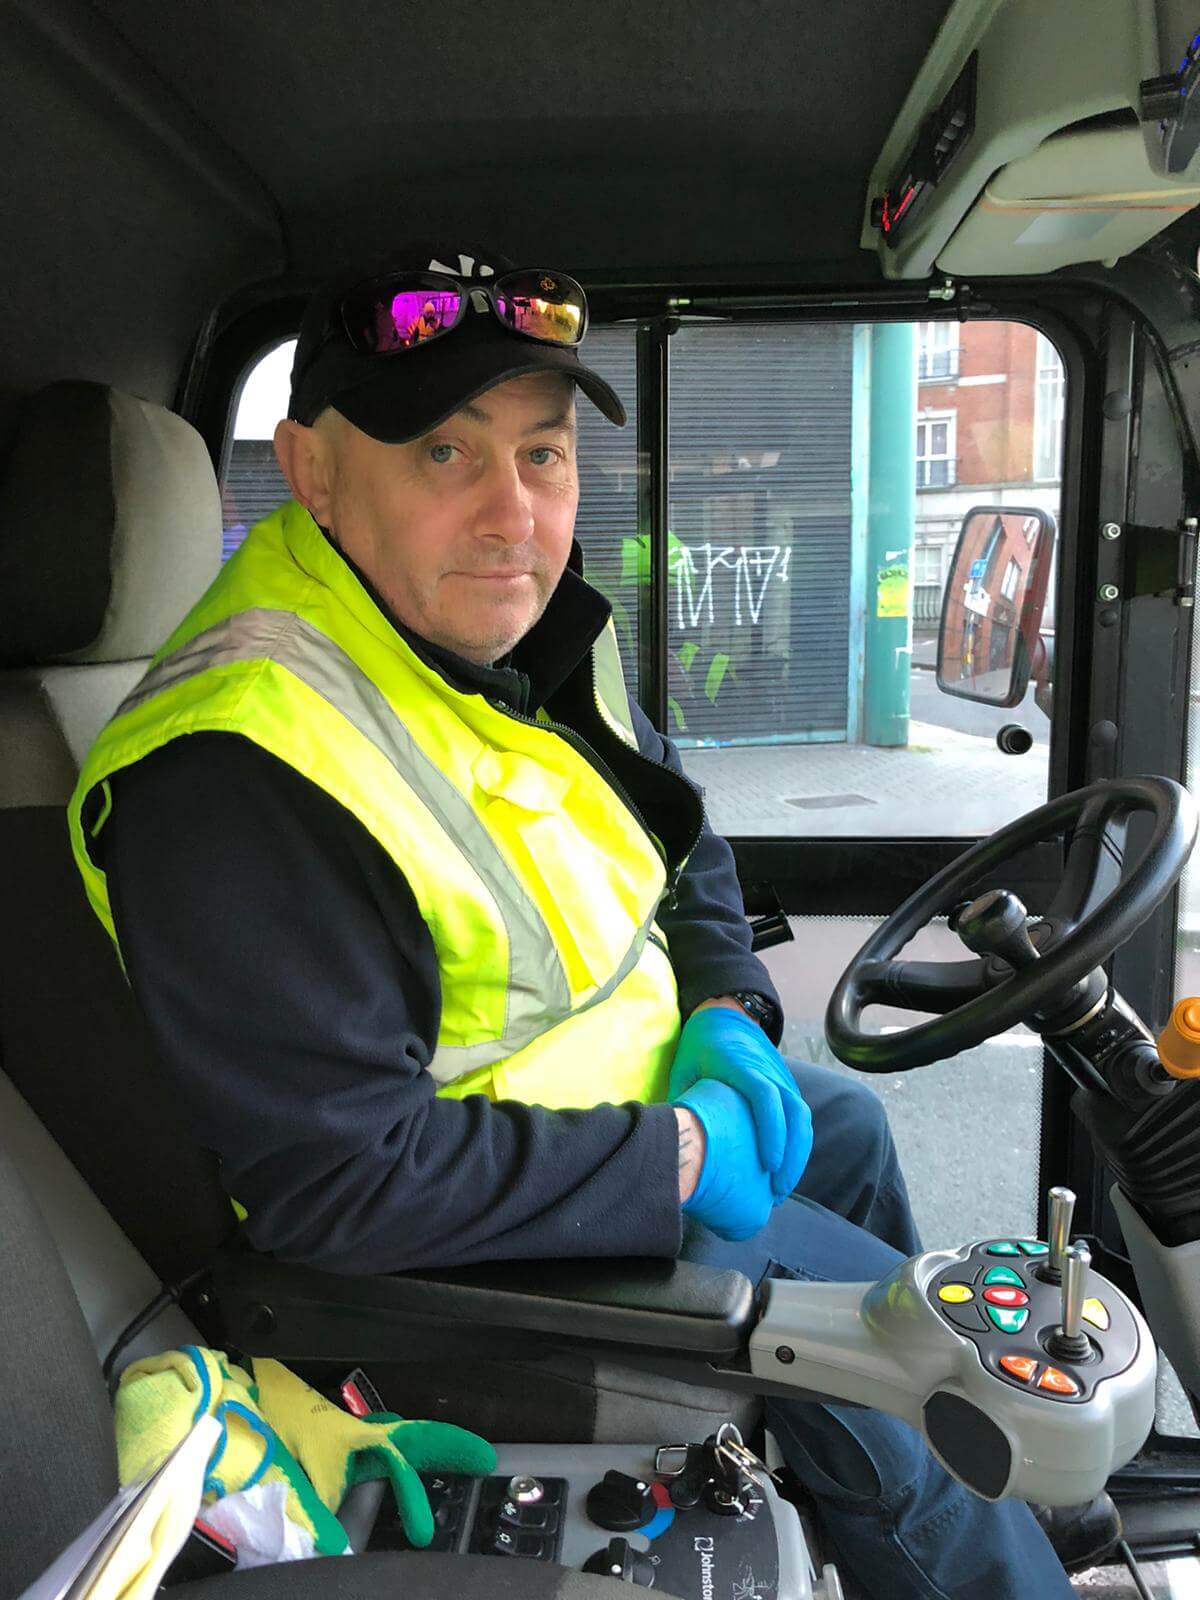 Stephen, DCC Road Sweeper